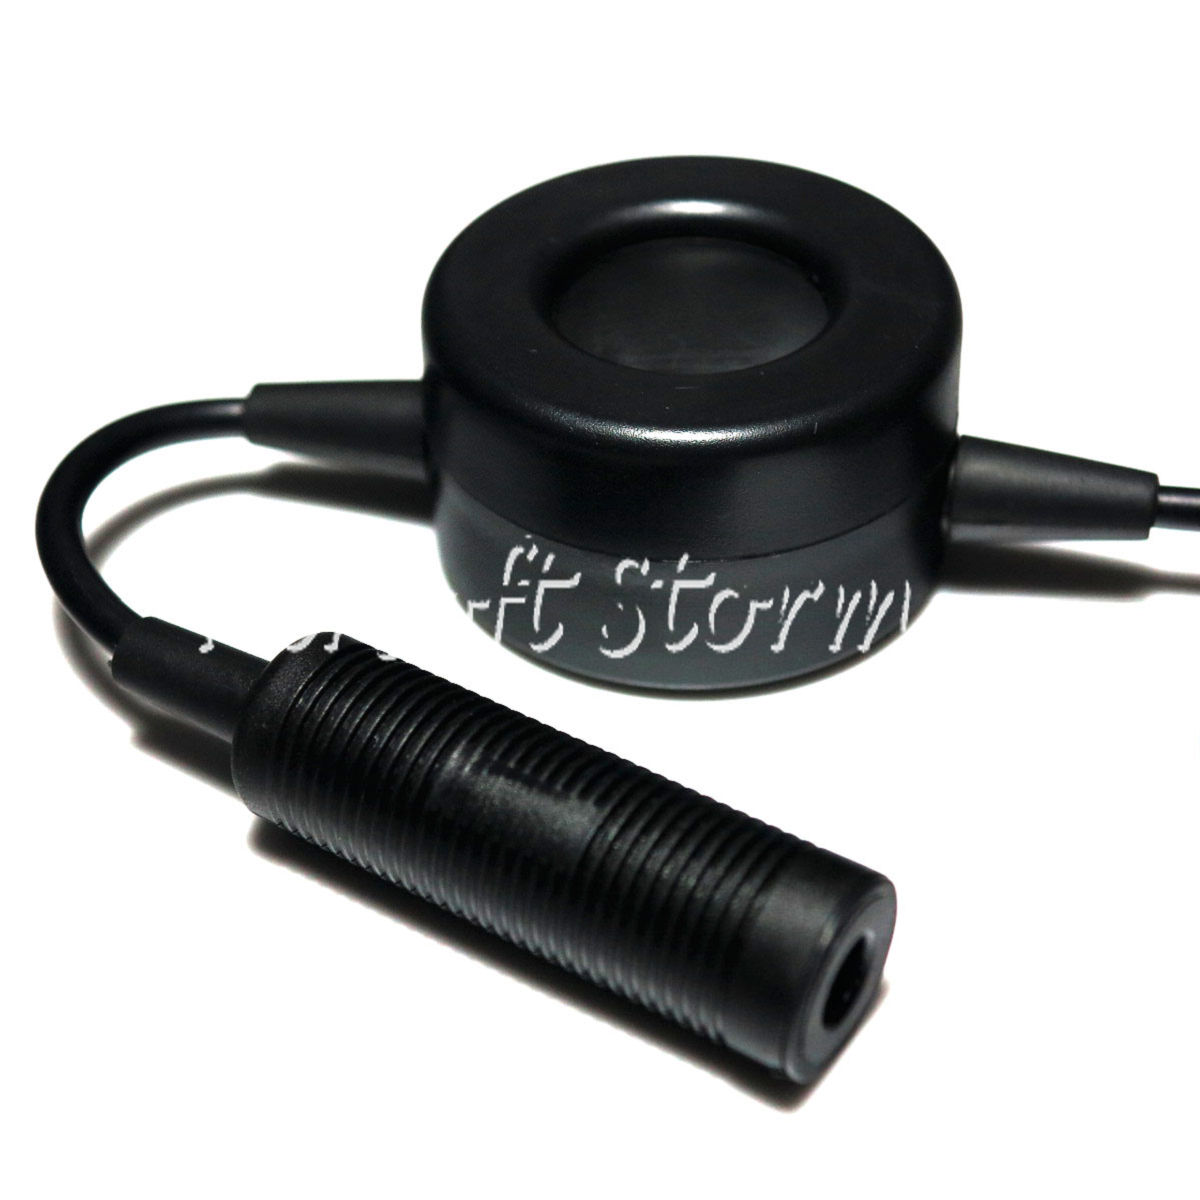 Airsoft Gear SWAT Element TCI Headset PTT for Motorola Talkabout Radio